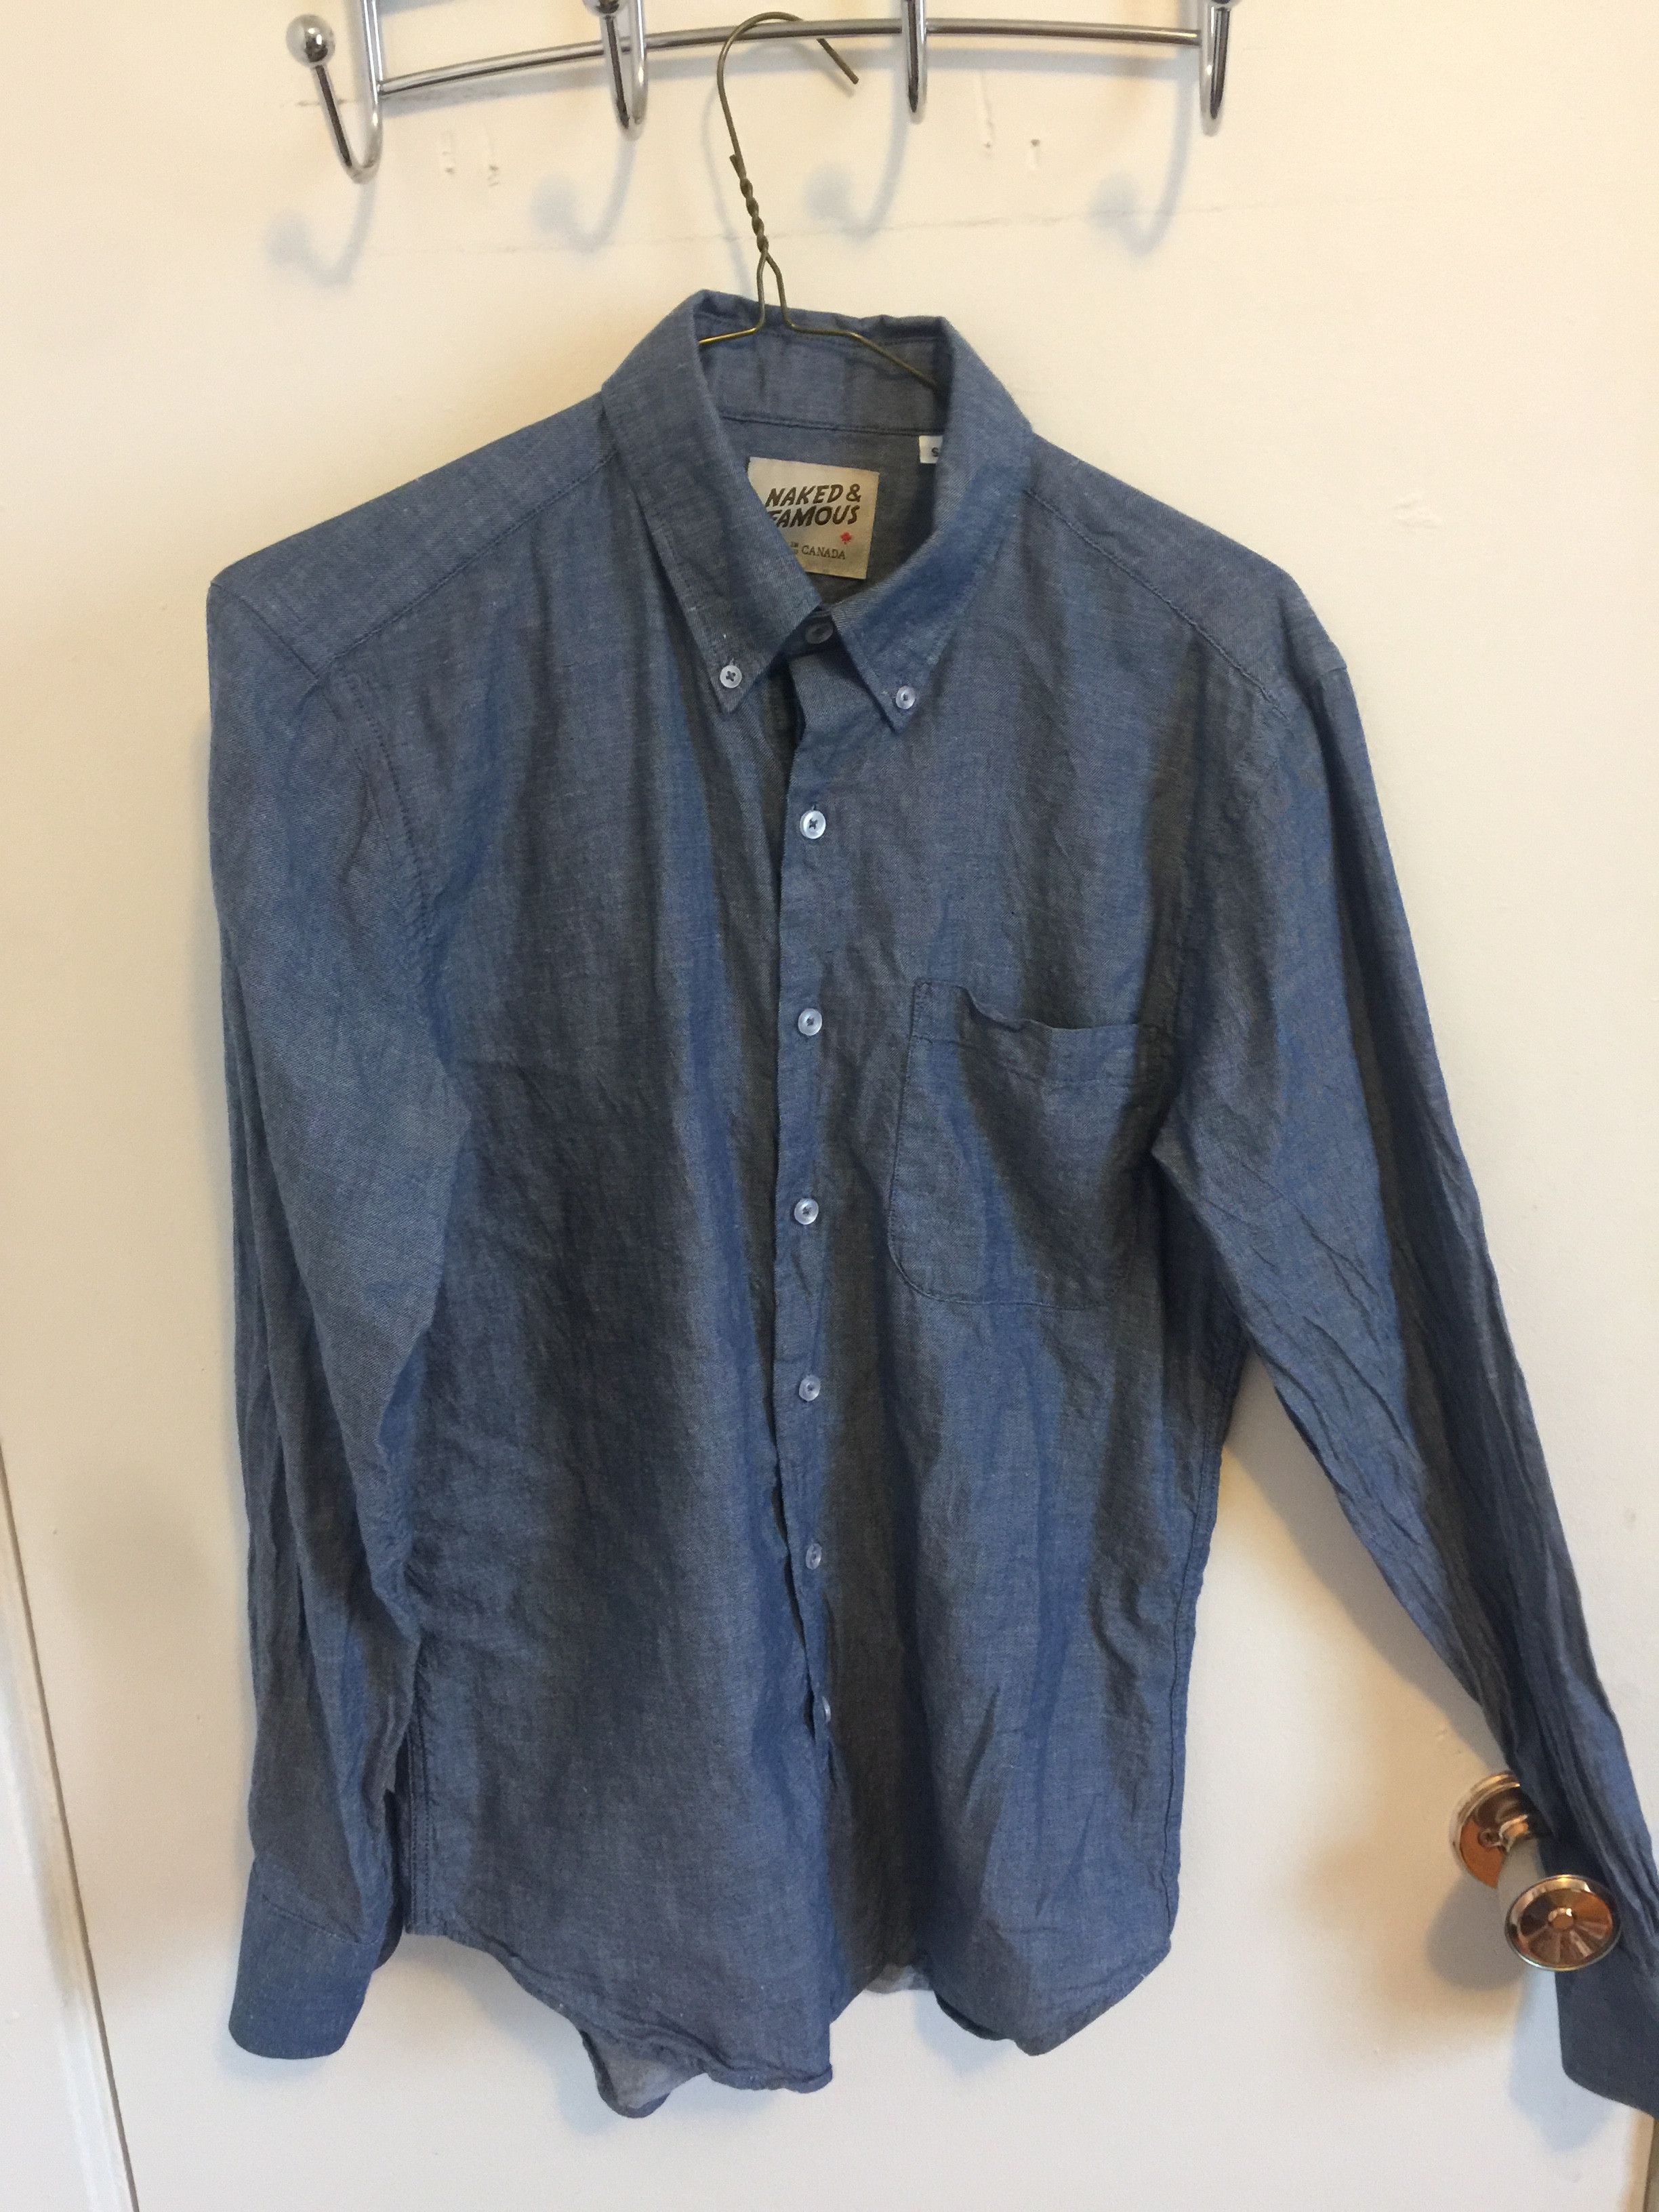 Naked & Famous Naked & Famous Chambray Oxford Shirt | Grailed